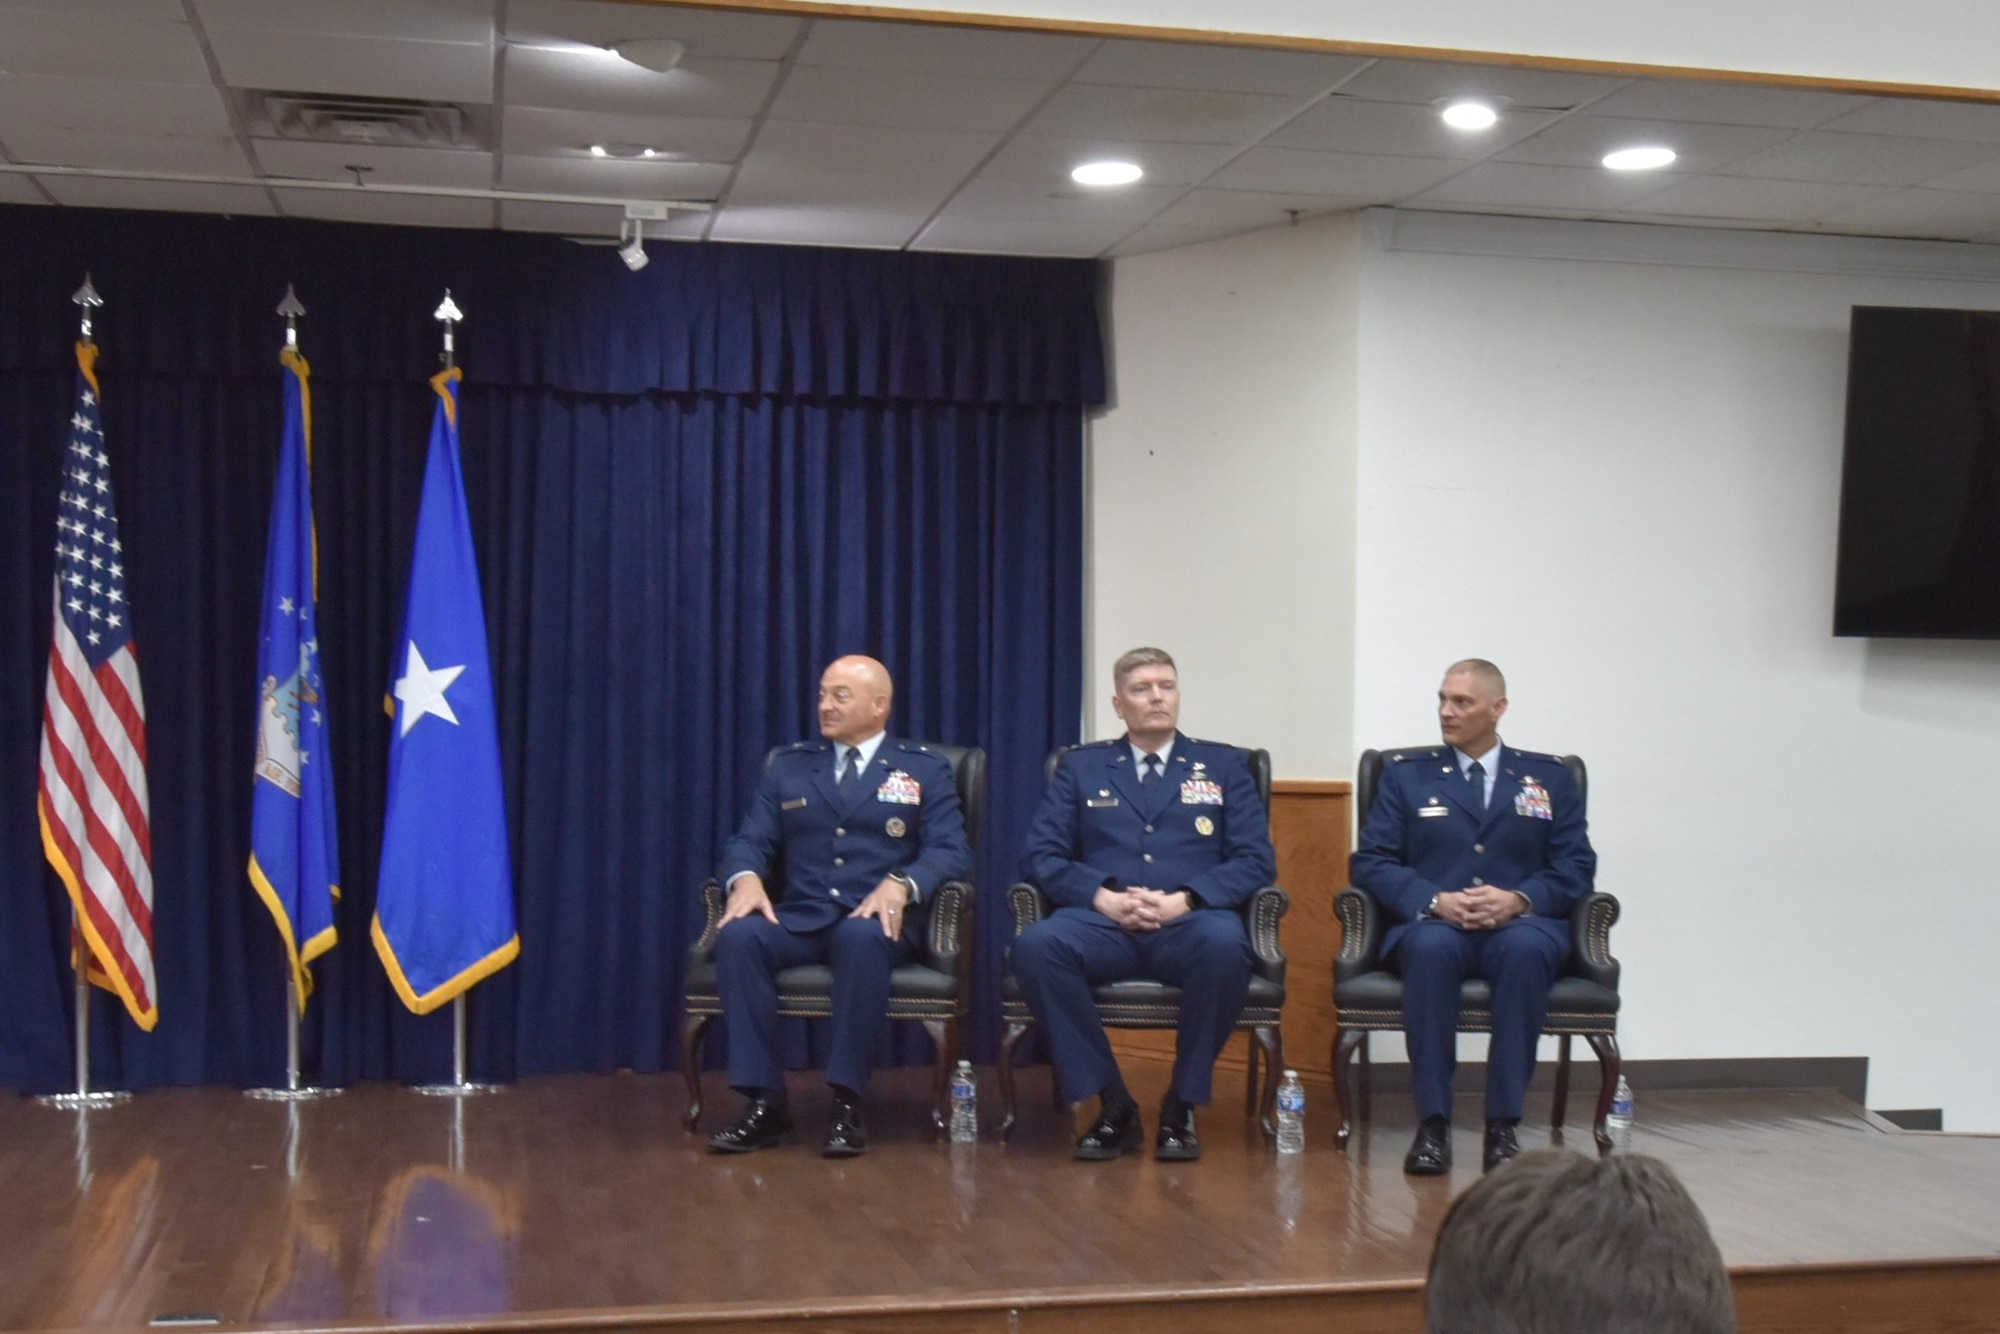 Three men in Air Force Uniforms sit in chairs on a stage.